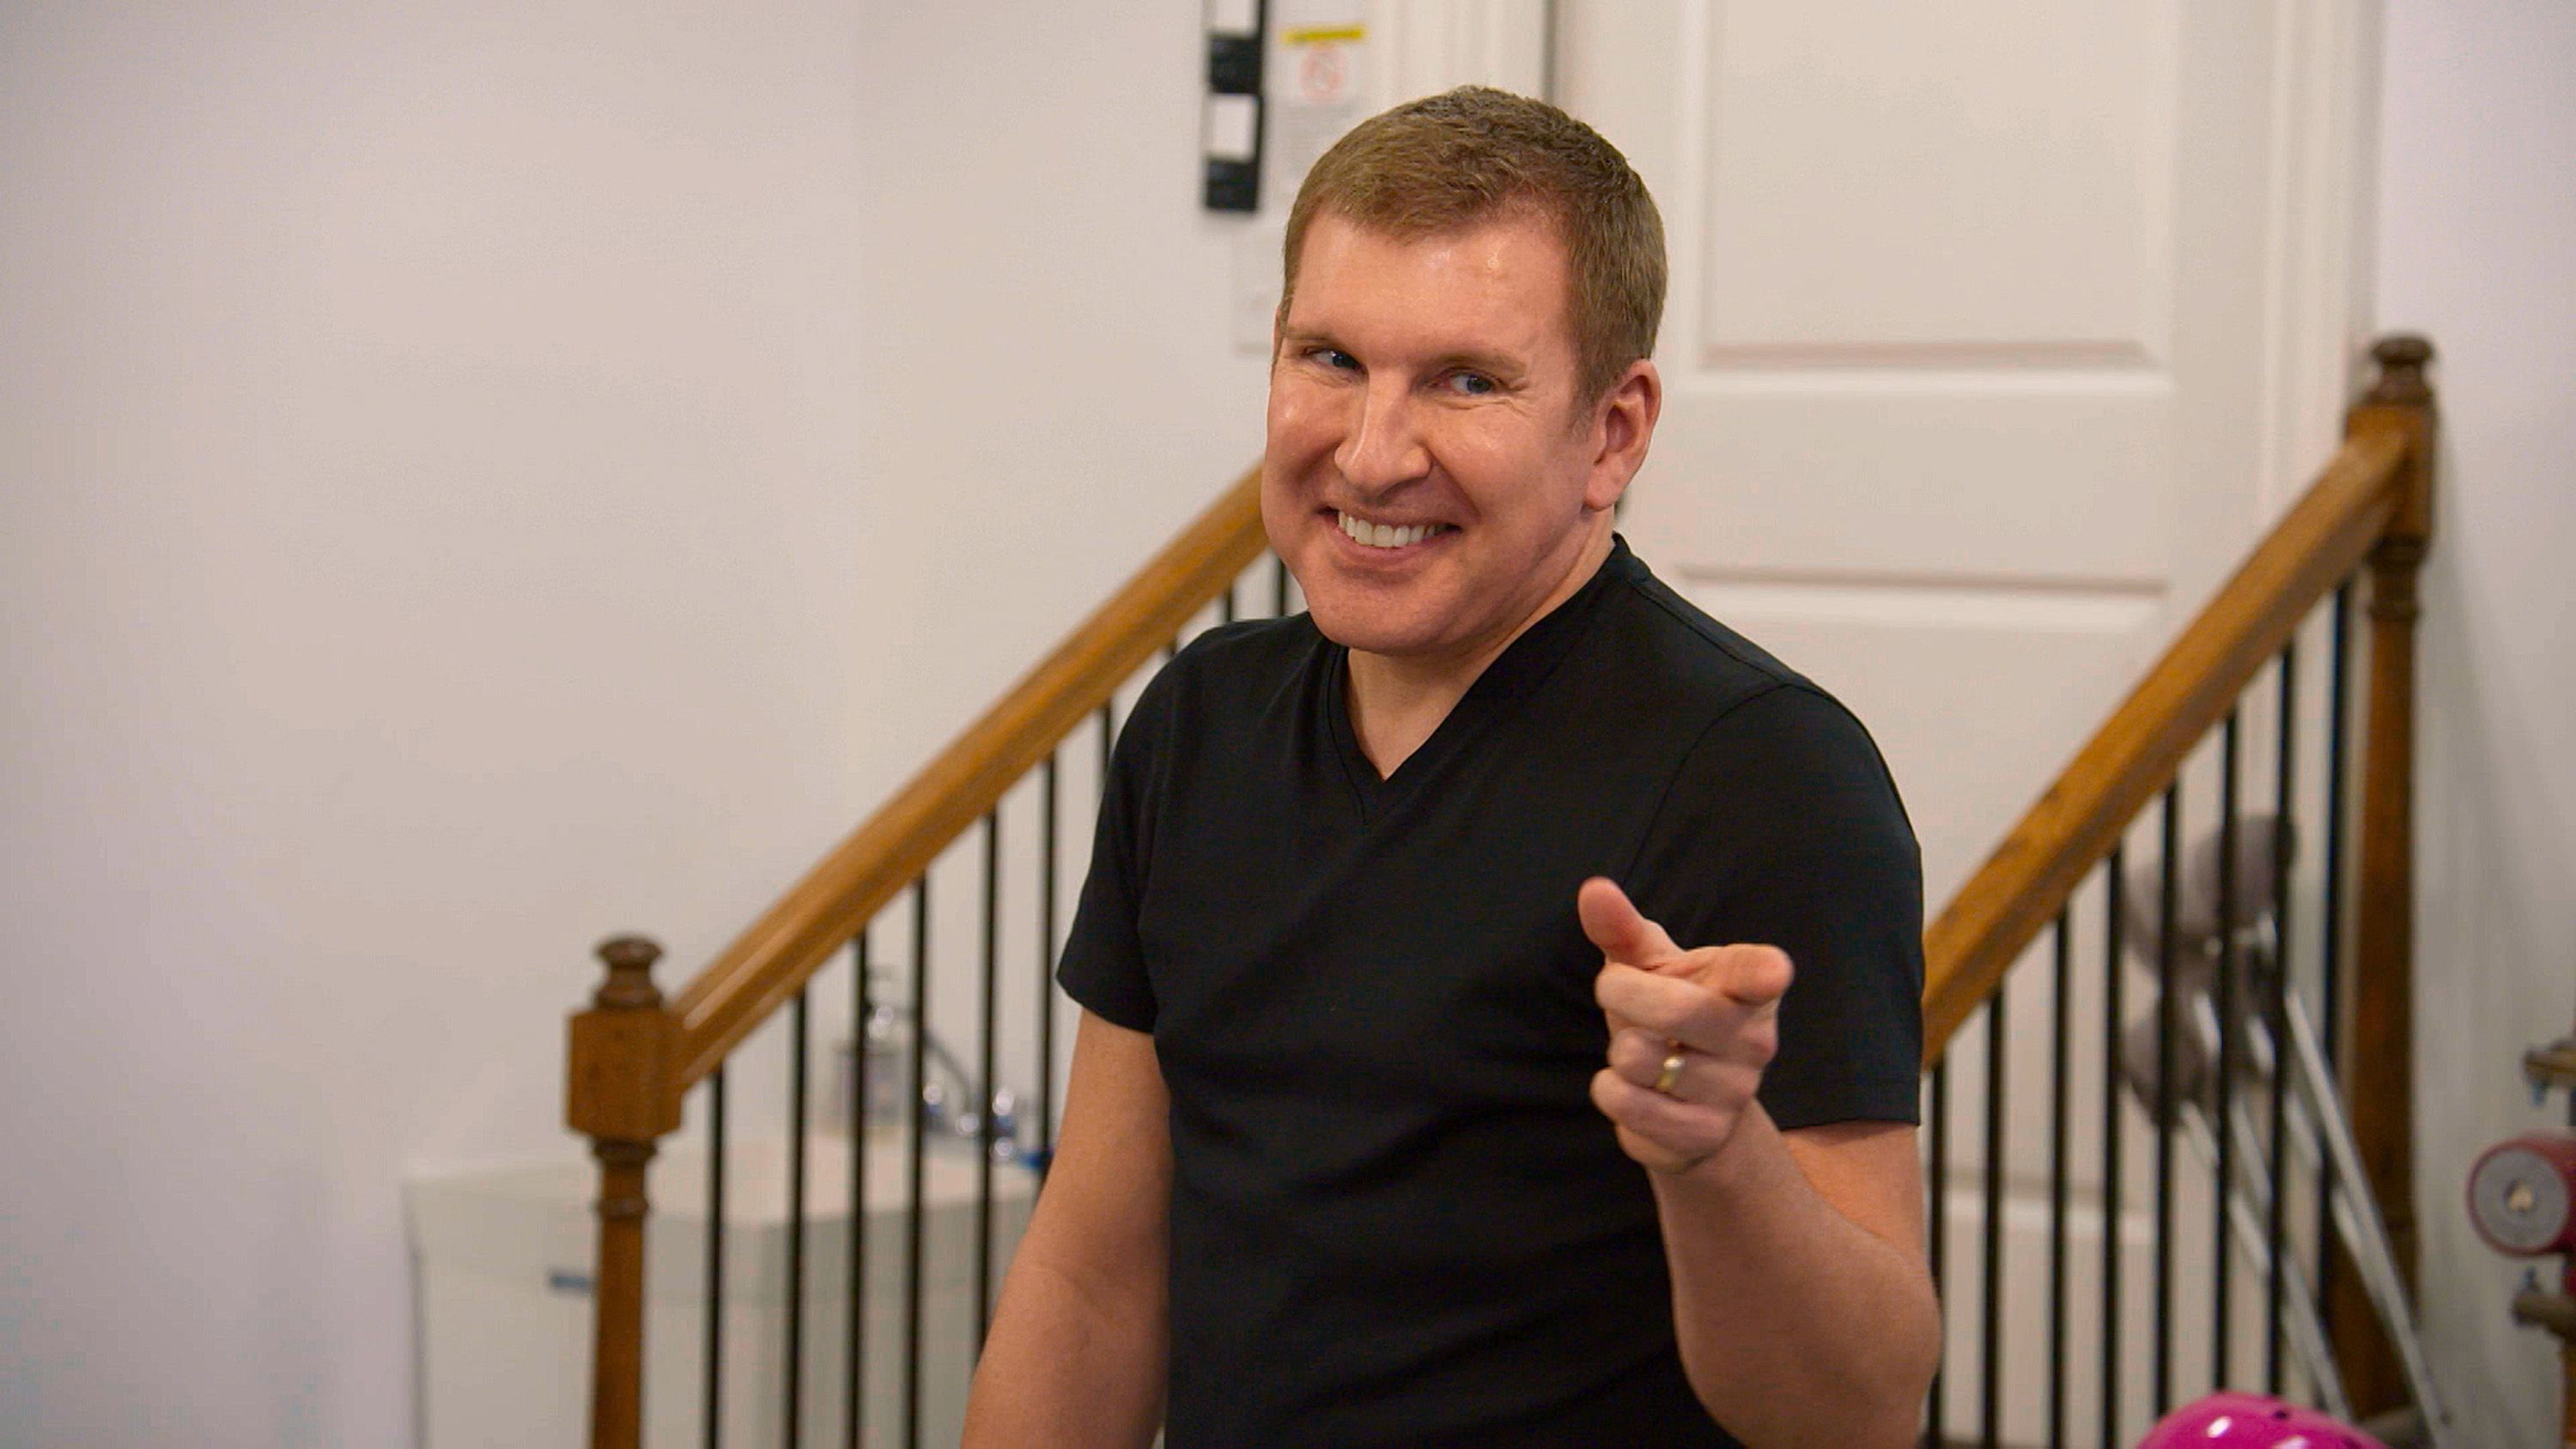 Chrisley Knows Best , "Lice Lice Baby" Episode 806 -- Pictured in this screengrab: Todd Chrisley | Source: Getty Images